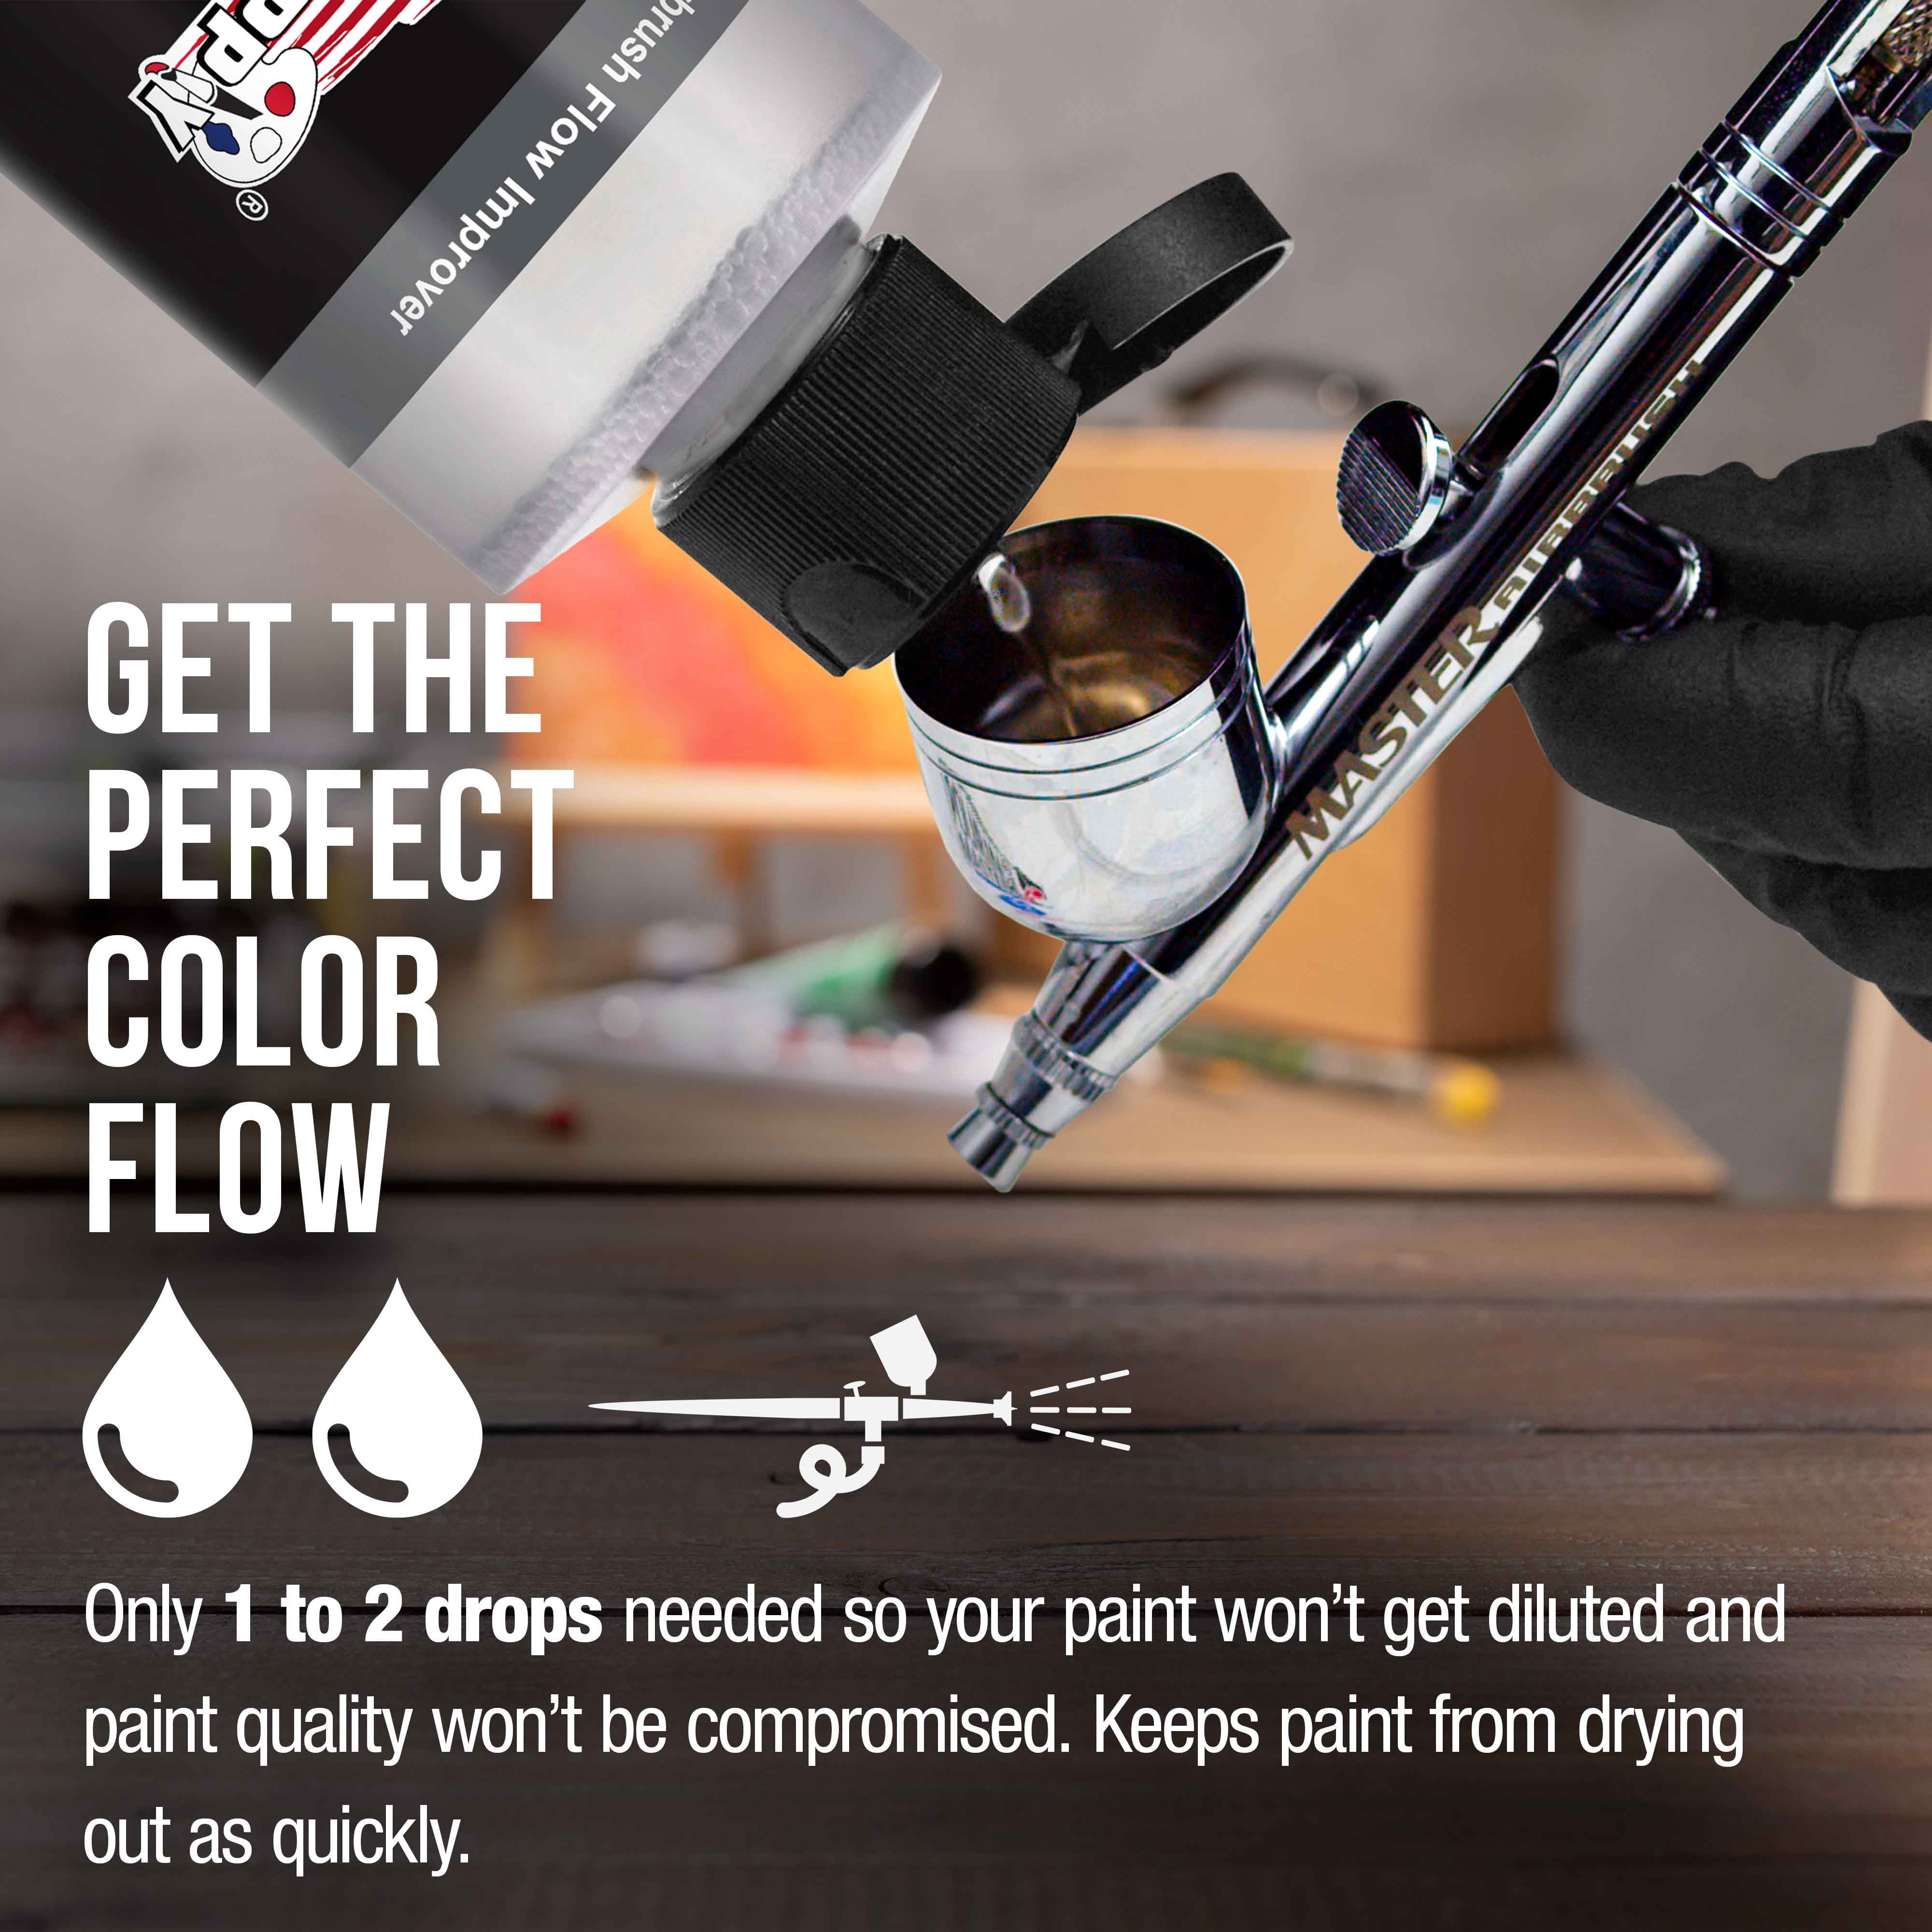 Vallejo Airbrush Flow Improver - Wet Paint Artists' Materials and Framing